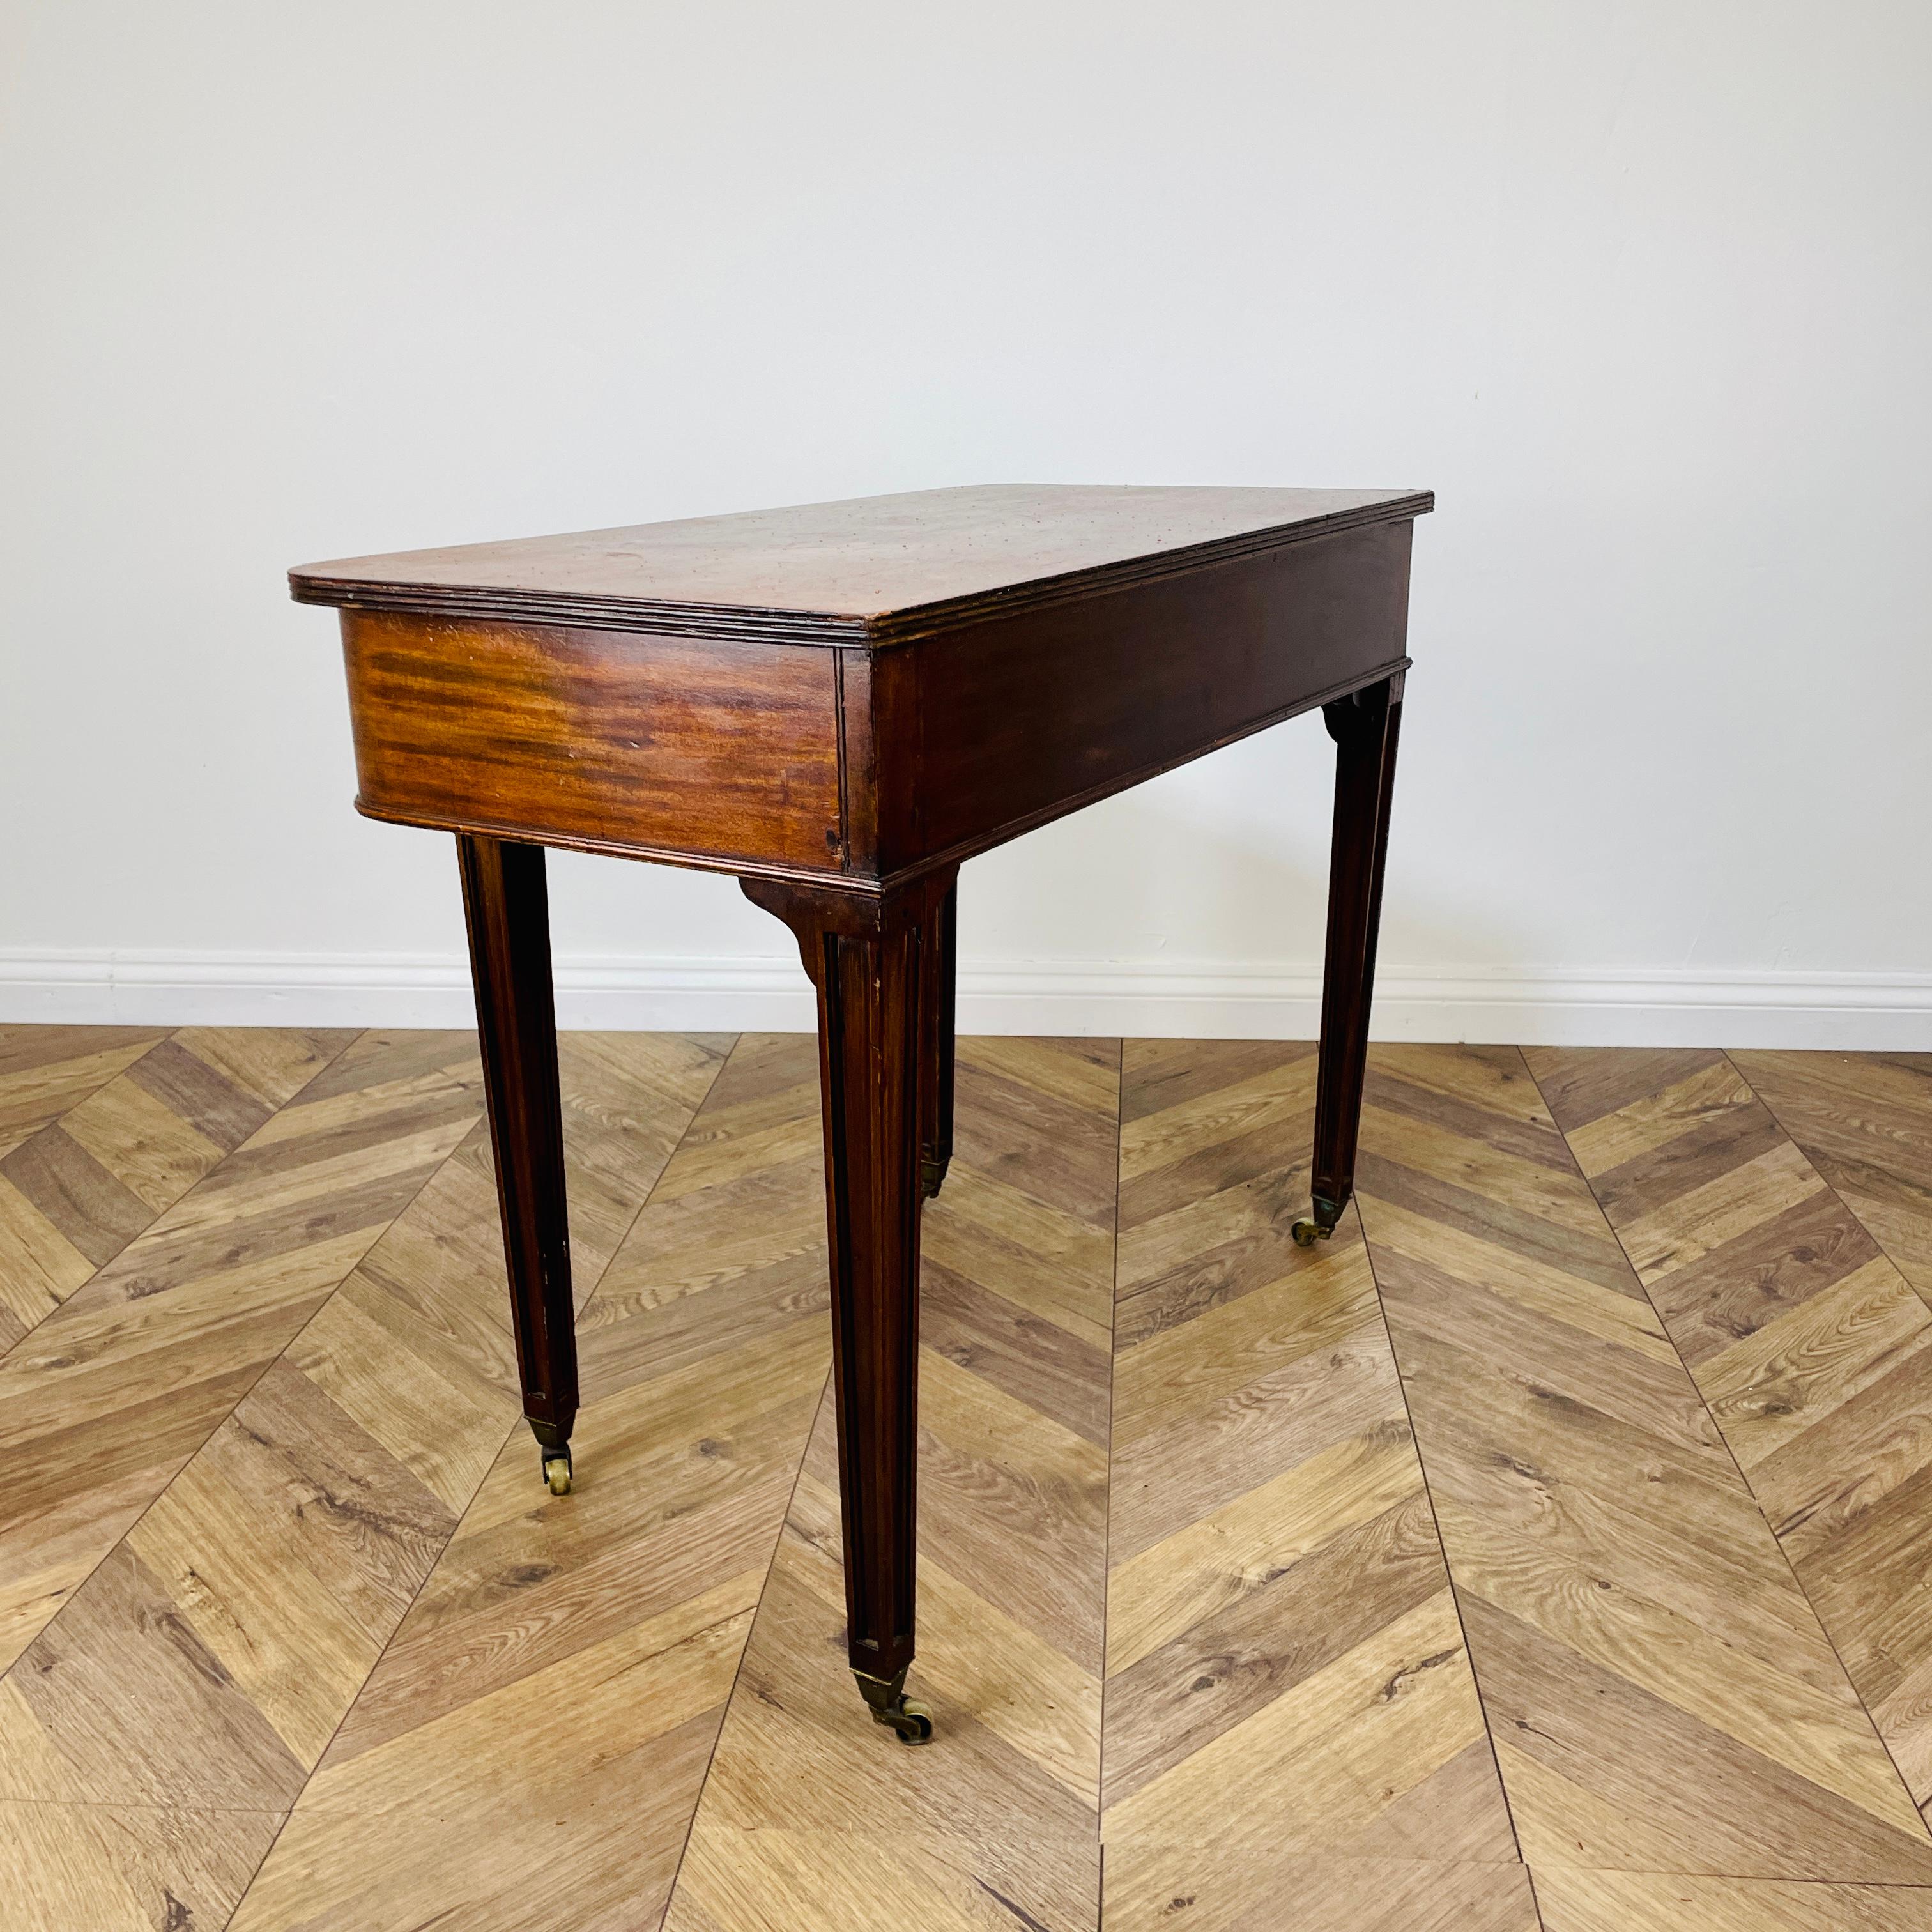 Antique English Side Table with Lift Lid Storage by Elkington + Co, 19th Century For Sale 13